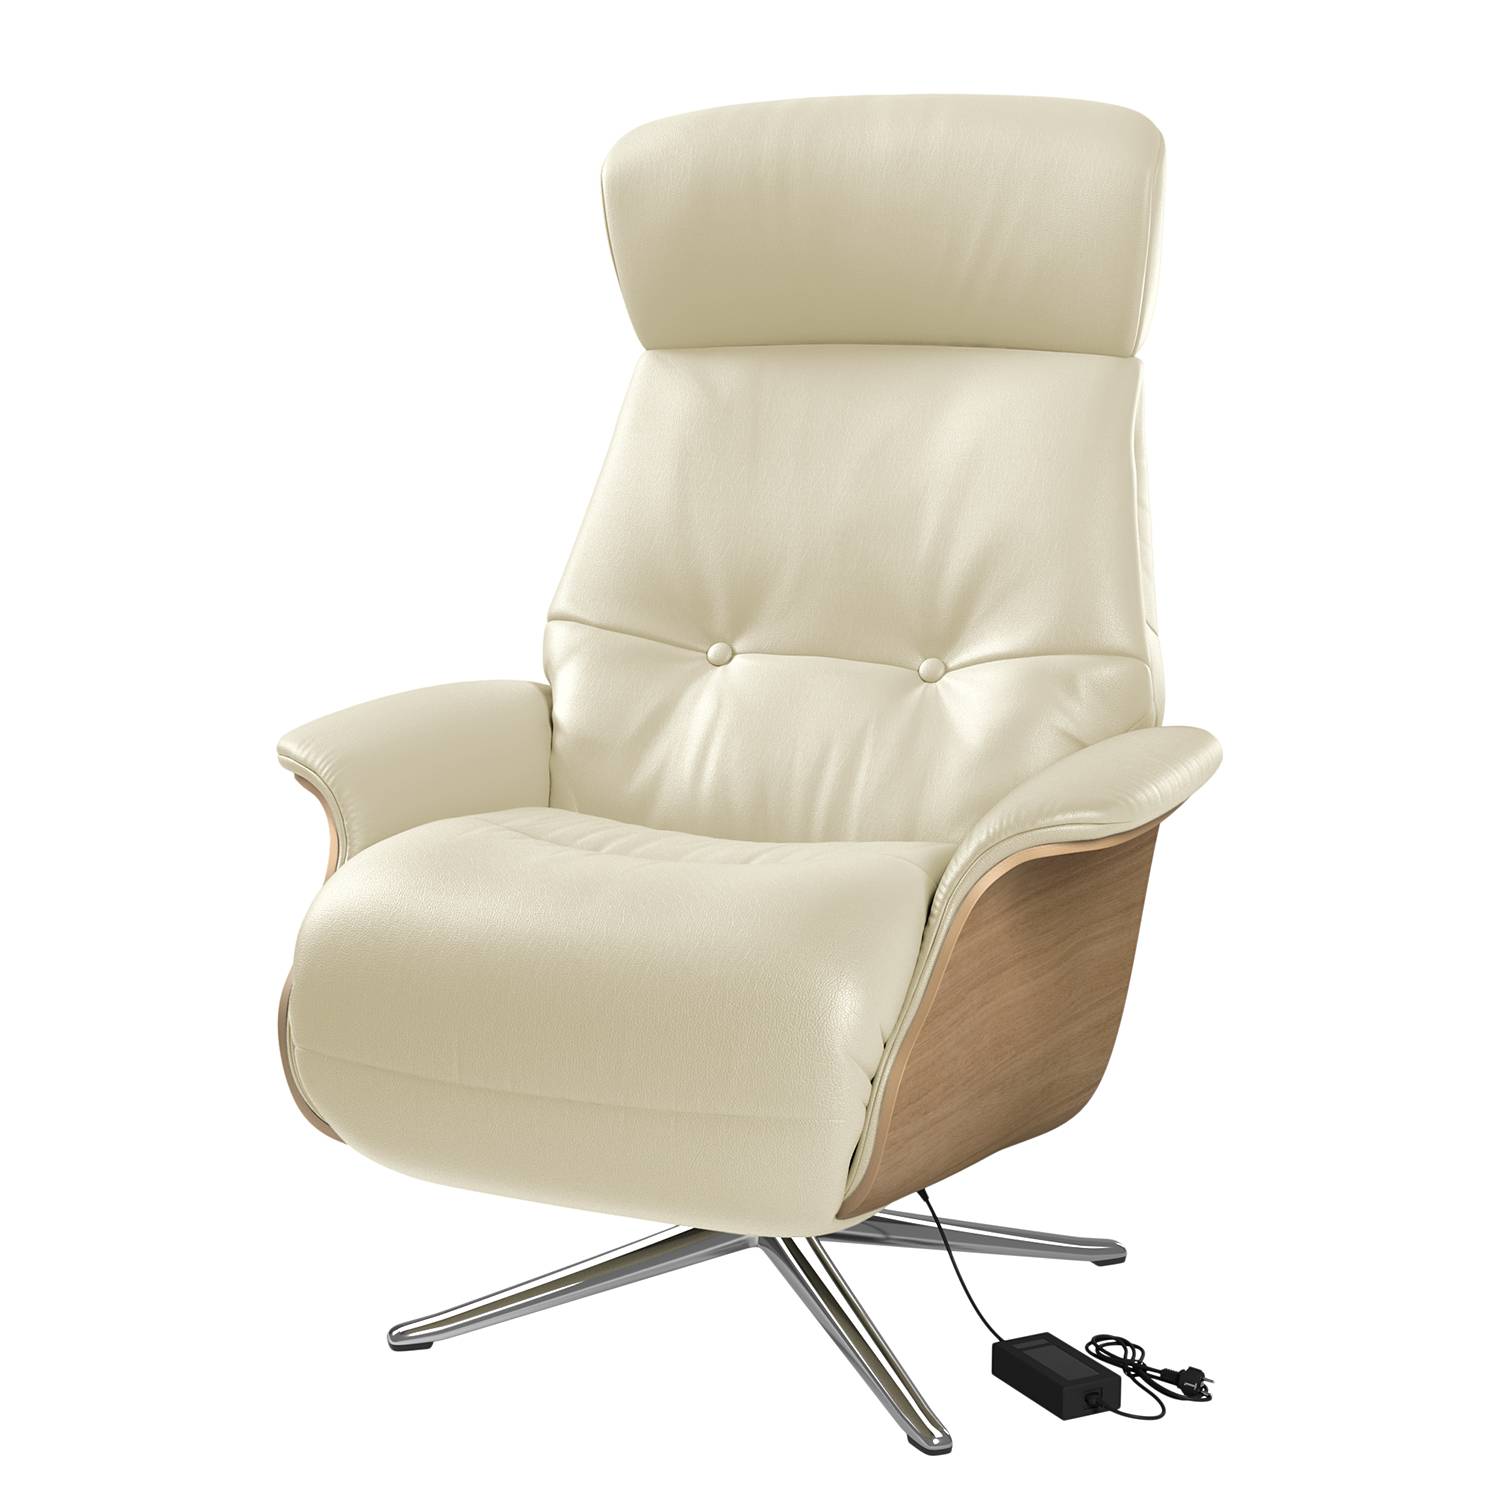 Image of Fauteuil relax Anderson VI 000000001000131464